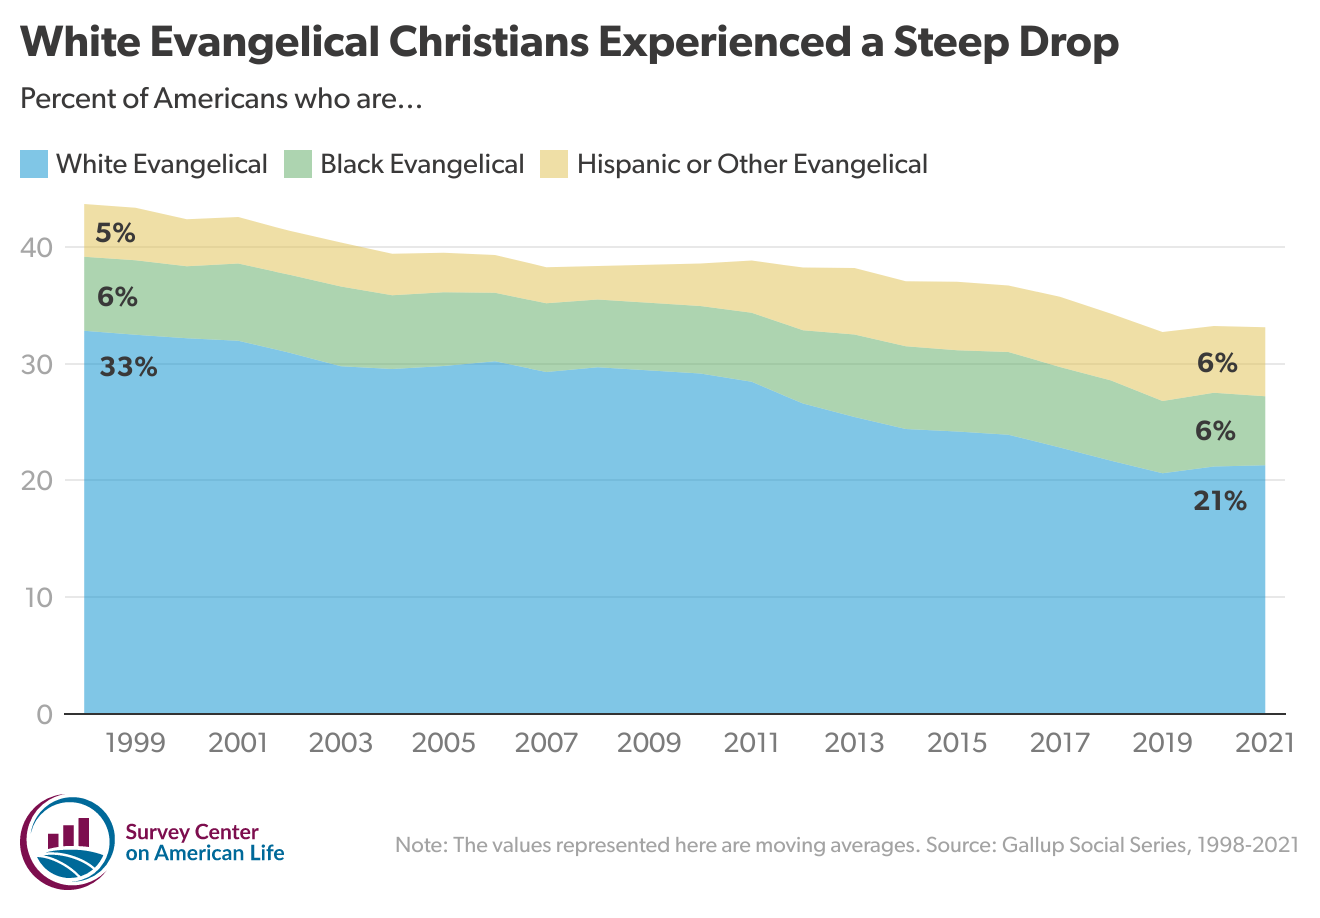 Area chart showing percentage of Americans who are white evangelical, black evangelical, or Hispanic or other Evangelical from 1999 to 2021